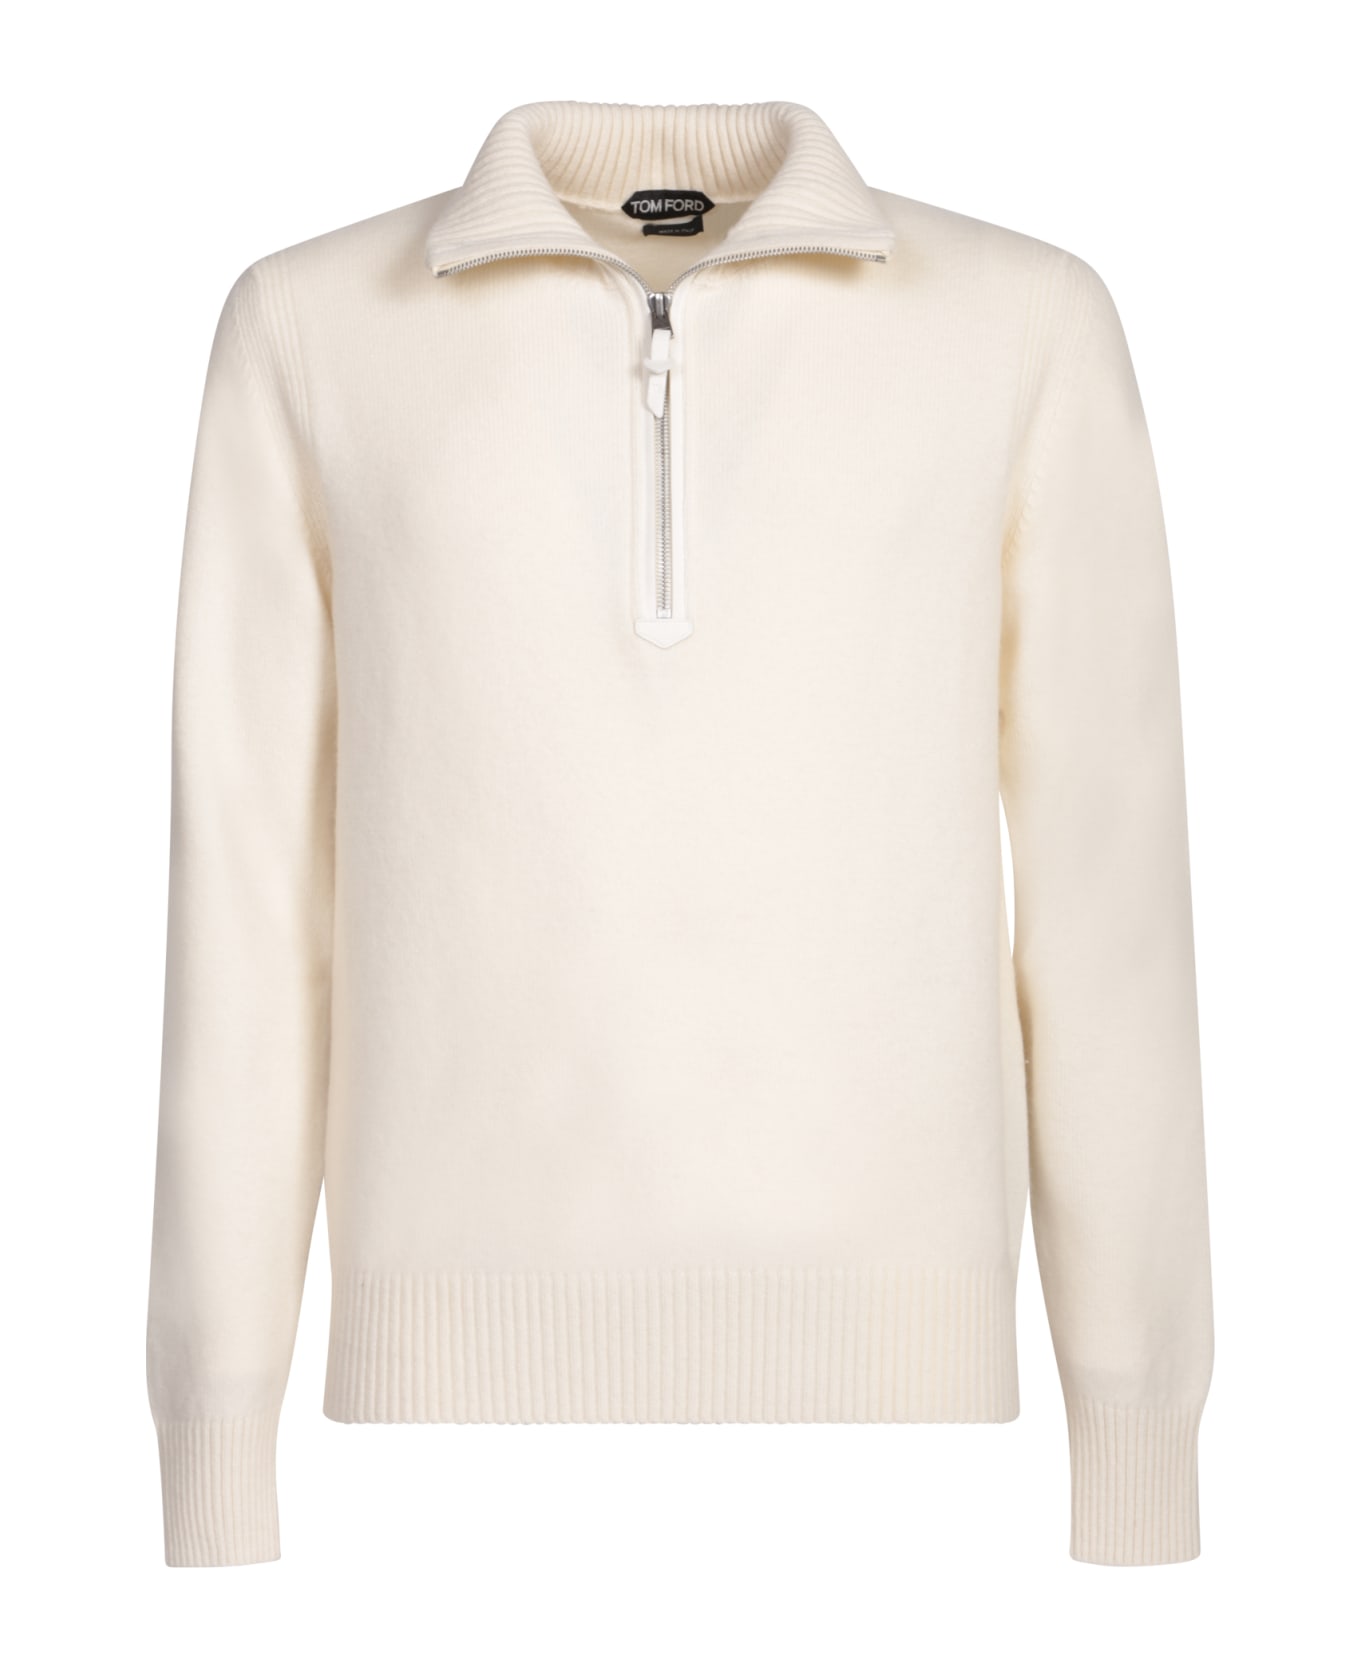 Tom Ford White Long-sleeve Sweater With Zip-up Mock Neck In Wool And Cashmere Man - White